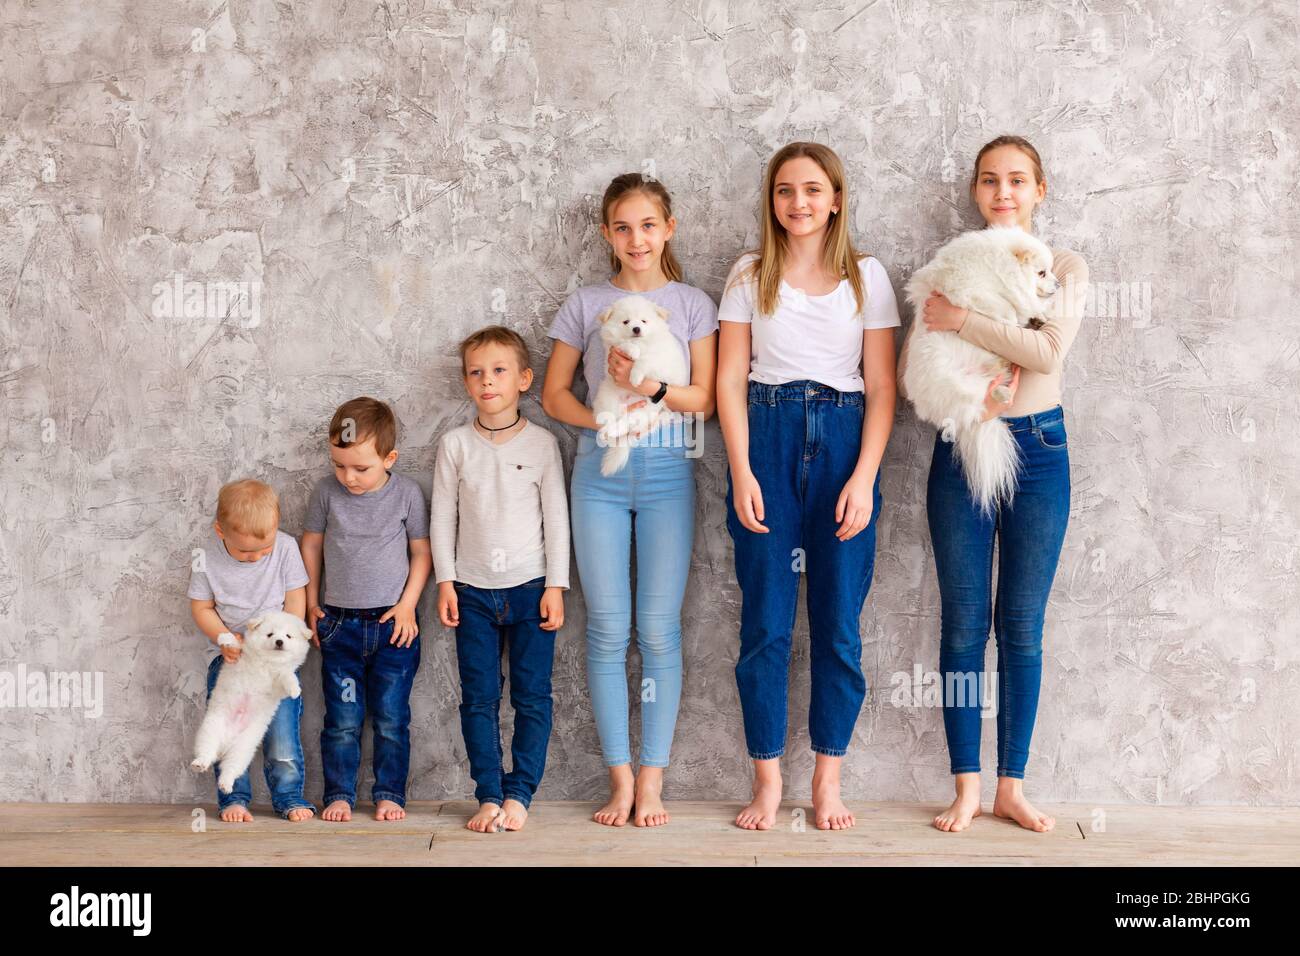 Happy children of different age with puppies standing in line. Teamwork, friendship and togetherness concept Stock Photo